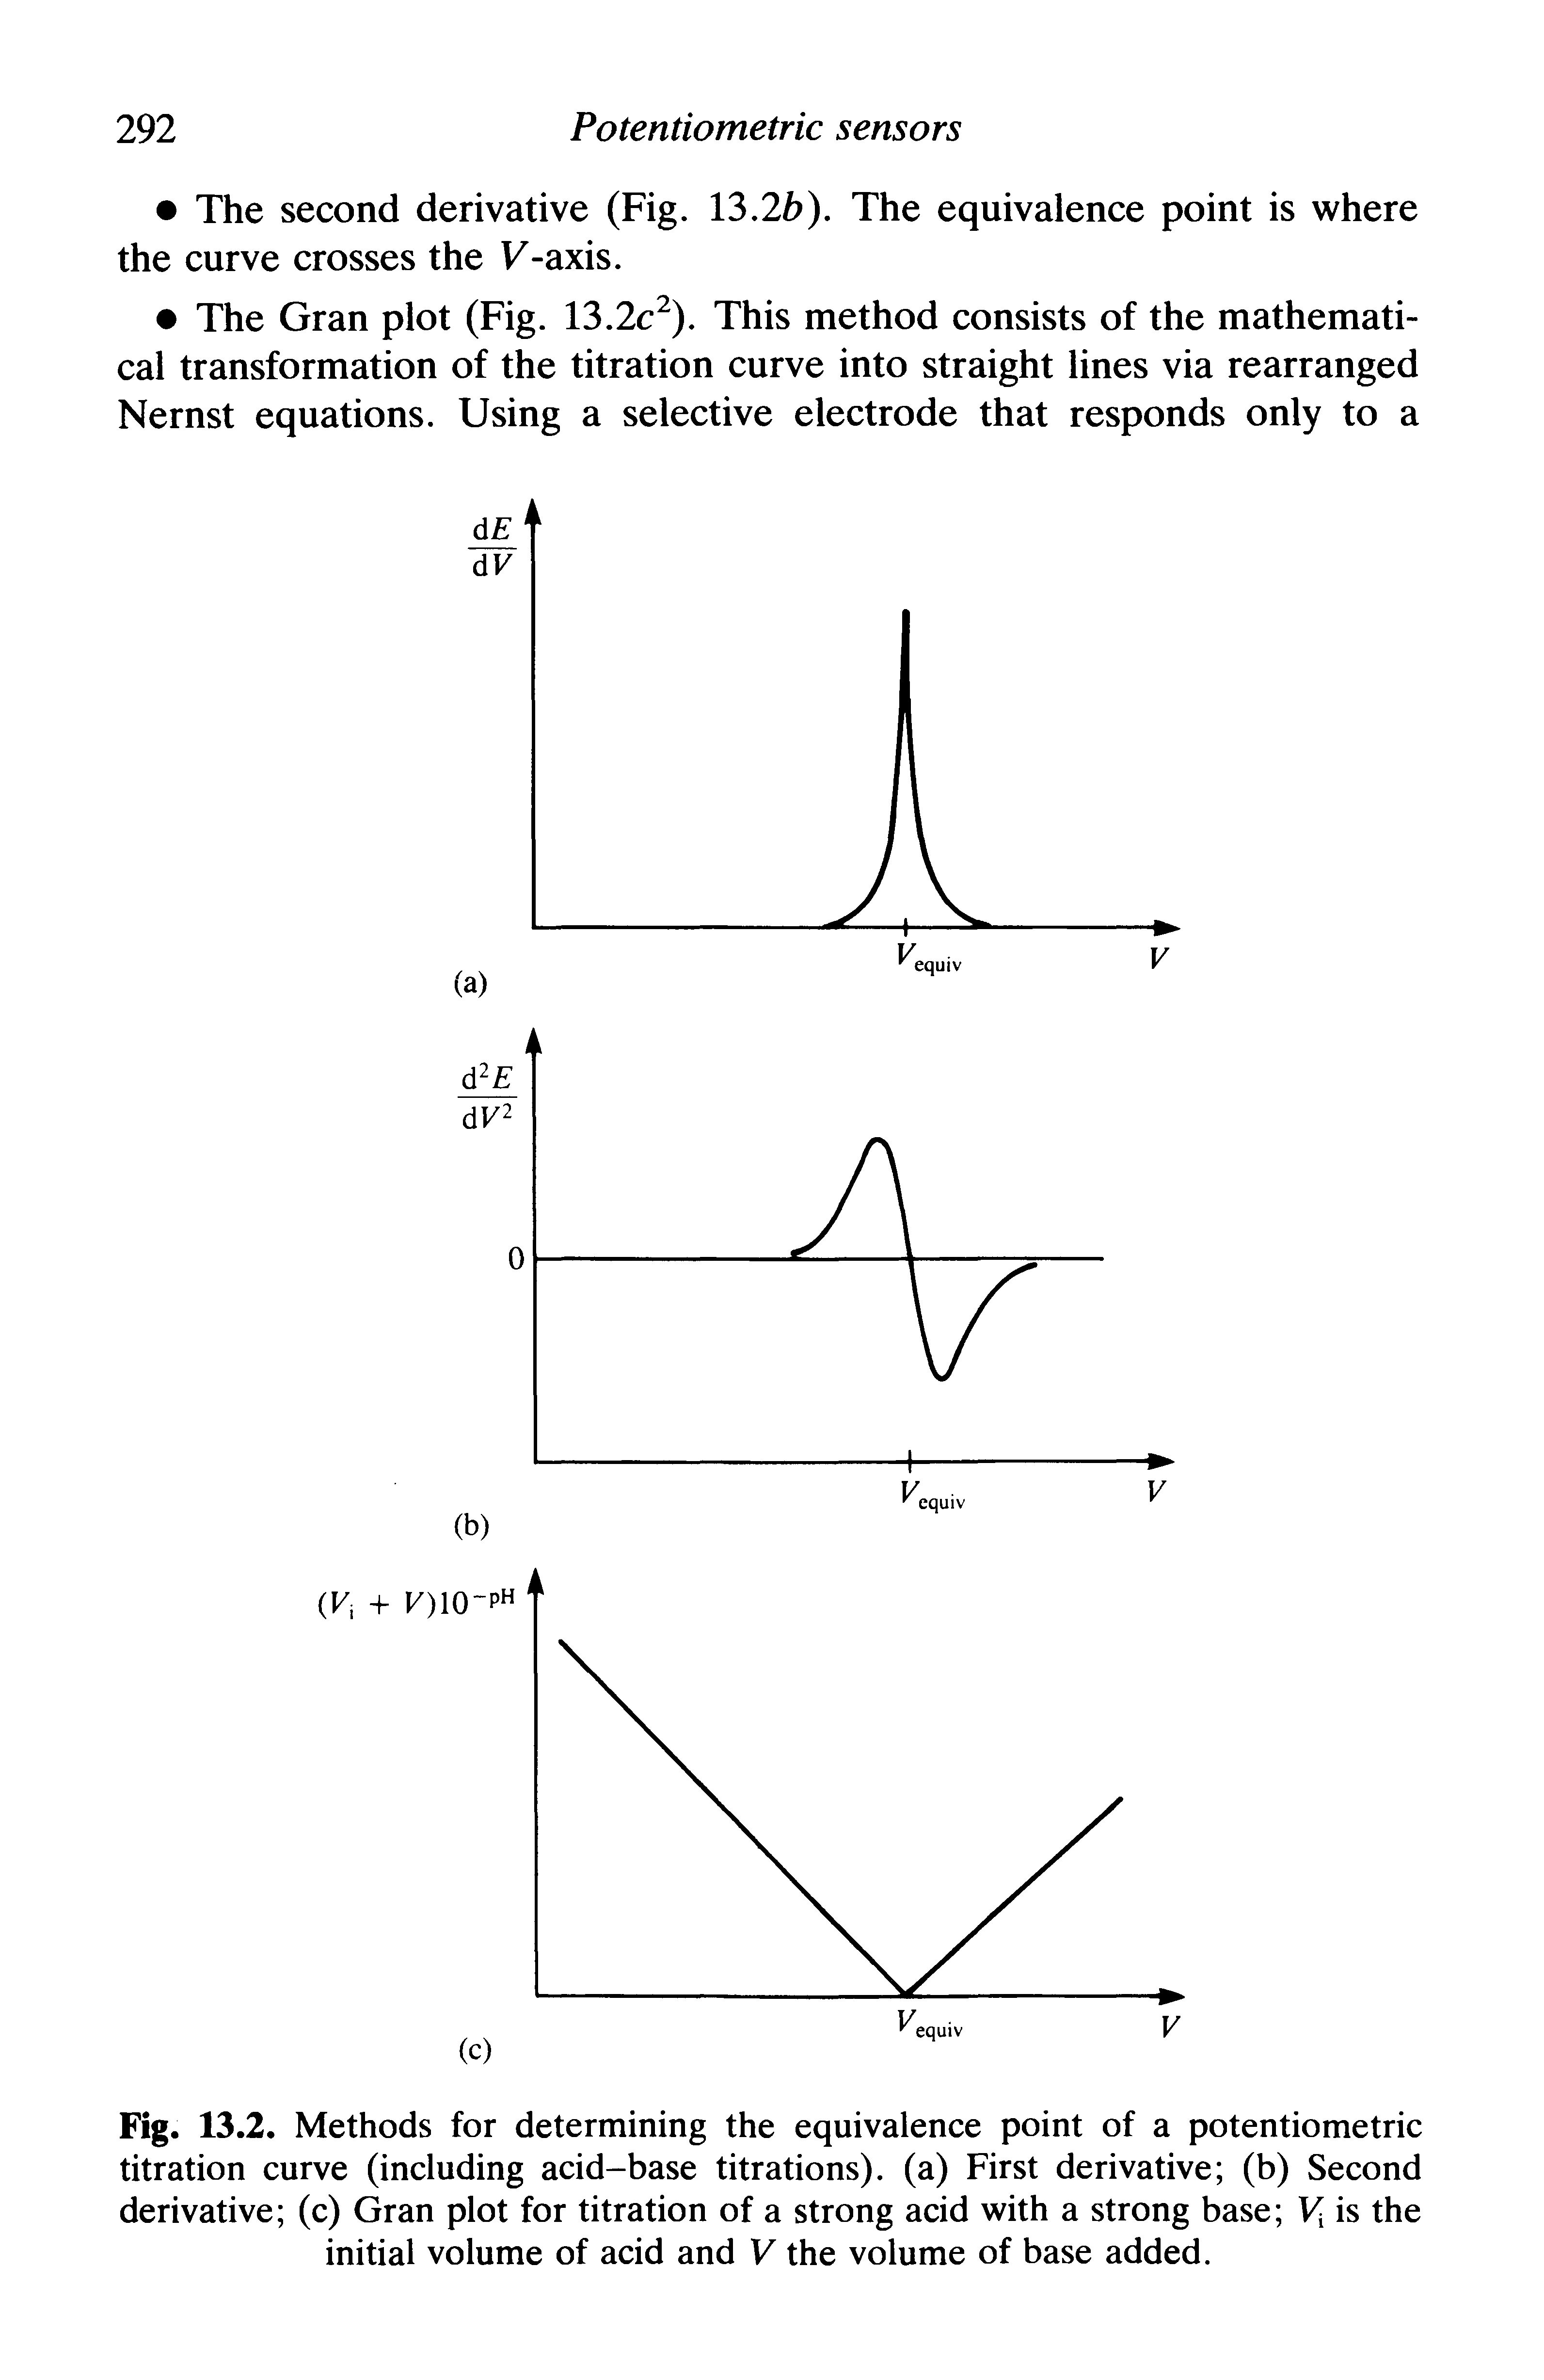 Fig. 13.2. Methods for determining the equivalence point of a potentiometric titration curve (including acid-base titrations), (a) First derivative (b) Second derivative (c) Gran plot for titration of a strong acid with a strong base Vx is the initial volume of acid and V the volume of base added.